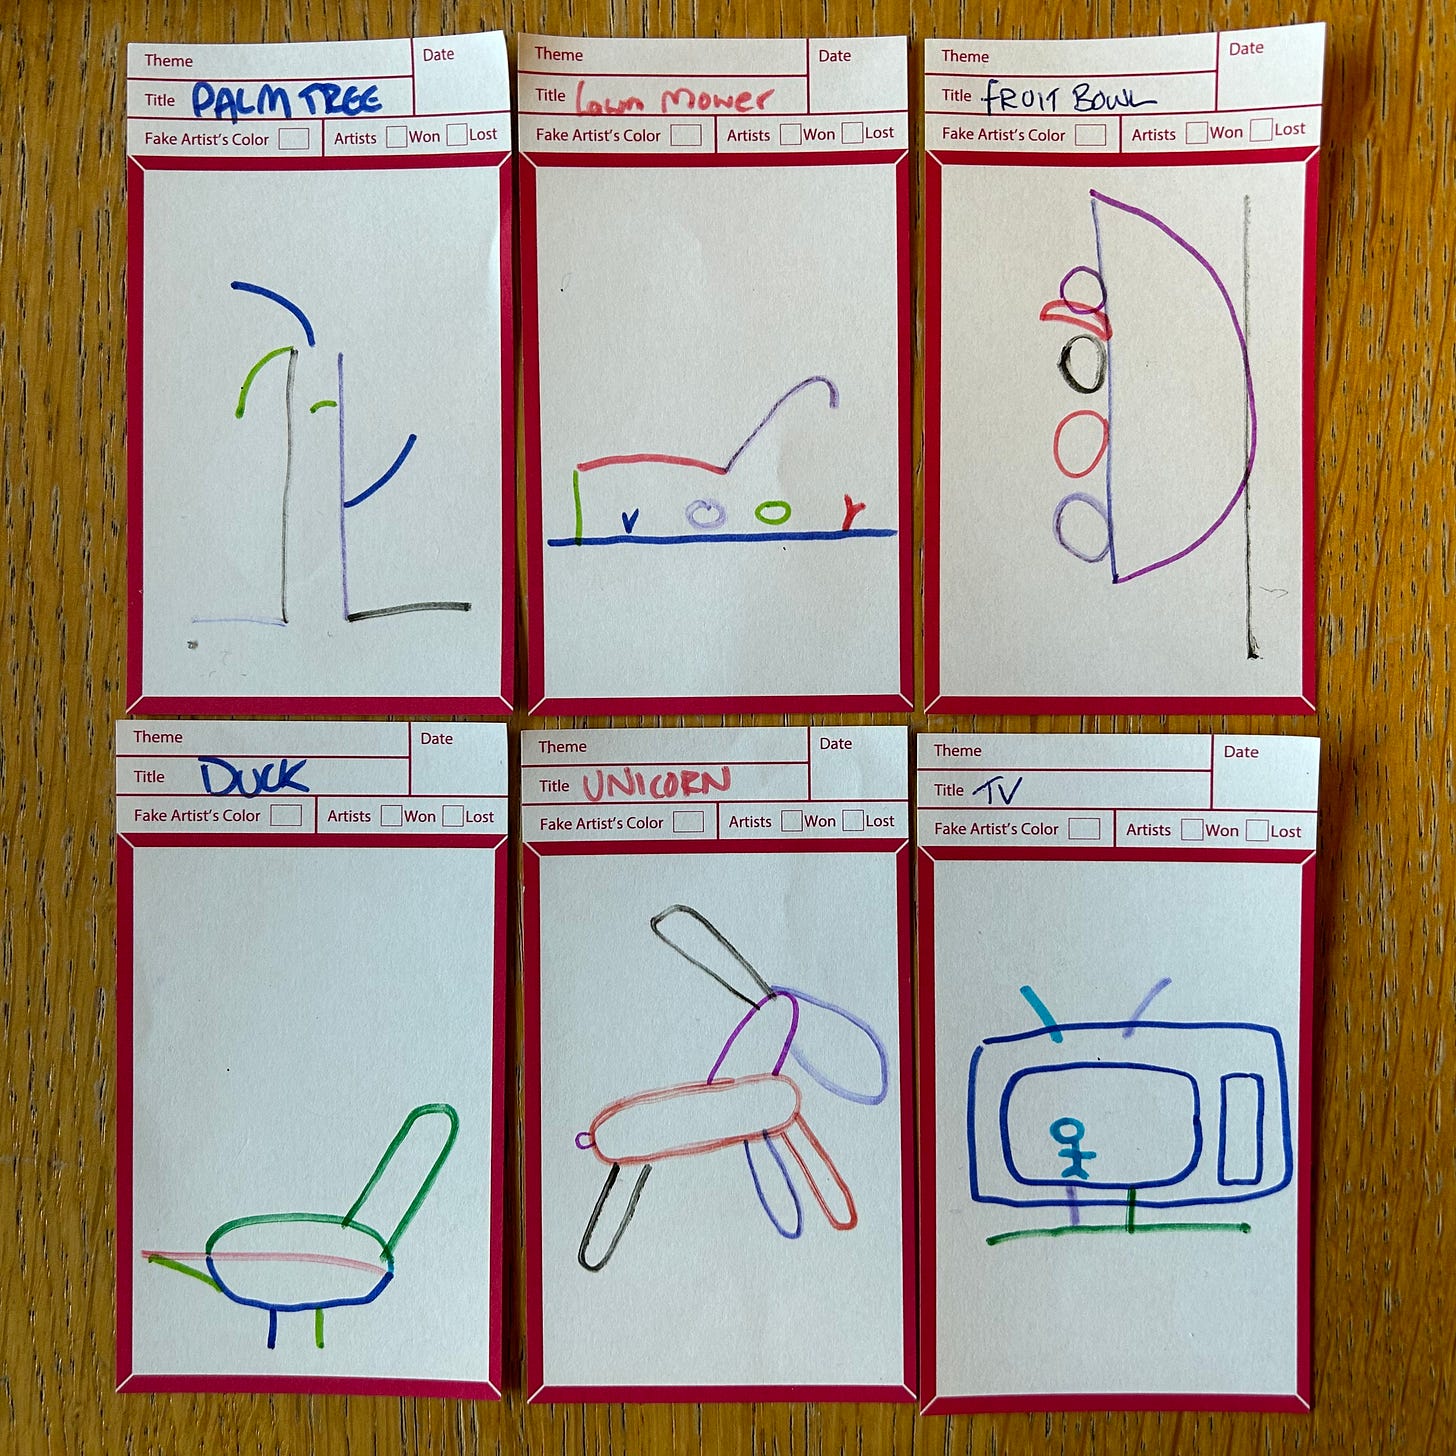 Pictures from the game. There is a palm tree. A Lawn mower. A fruit bowl (that has been drawn landscape rather than portrait). A duck (with no head). A unicorn (with it's horn on the back) and a TV.